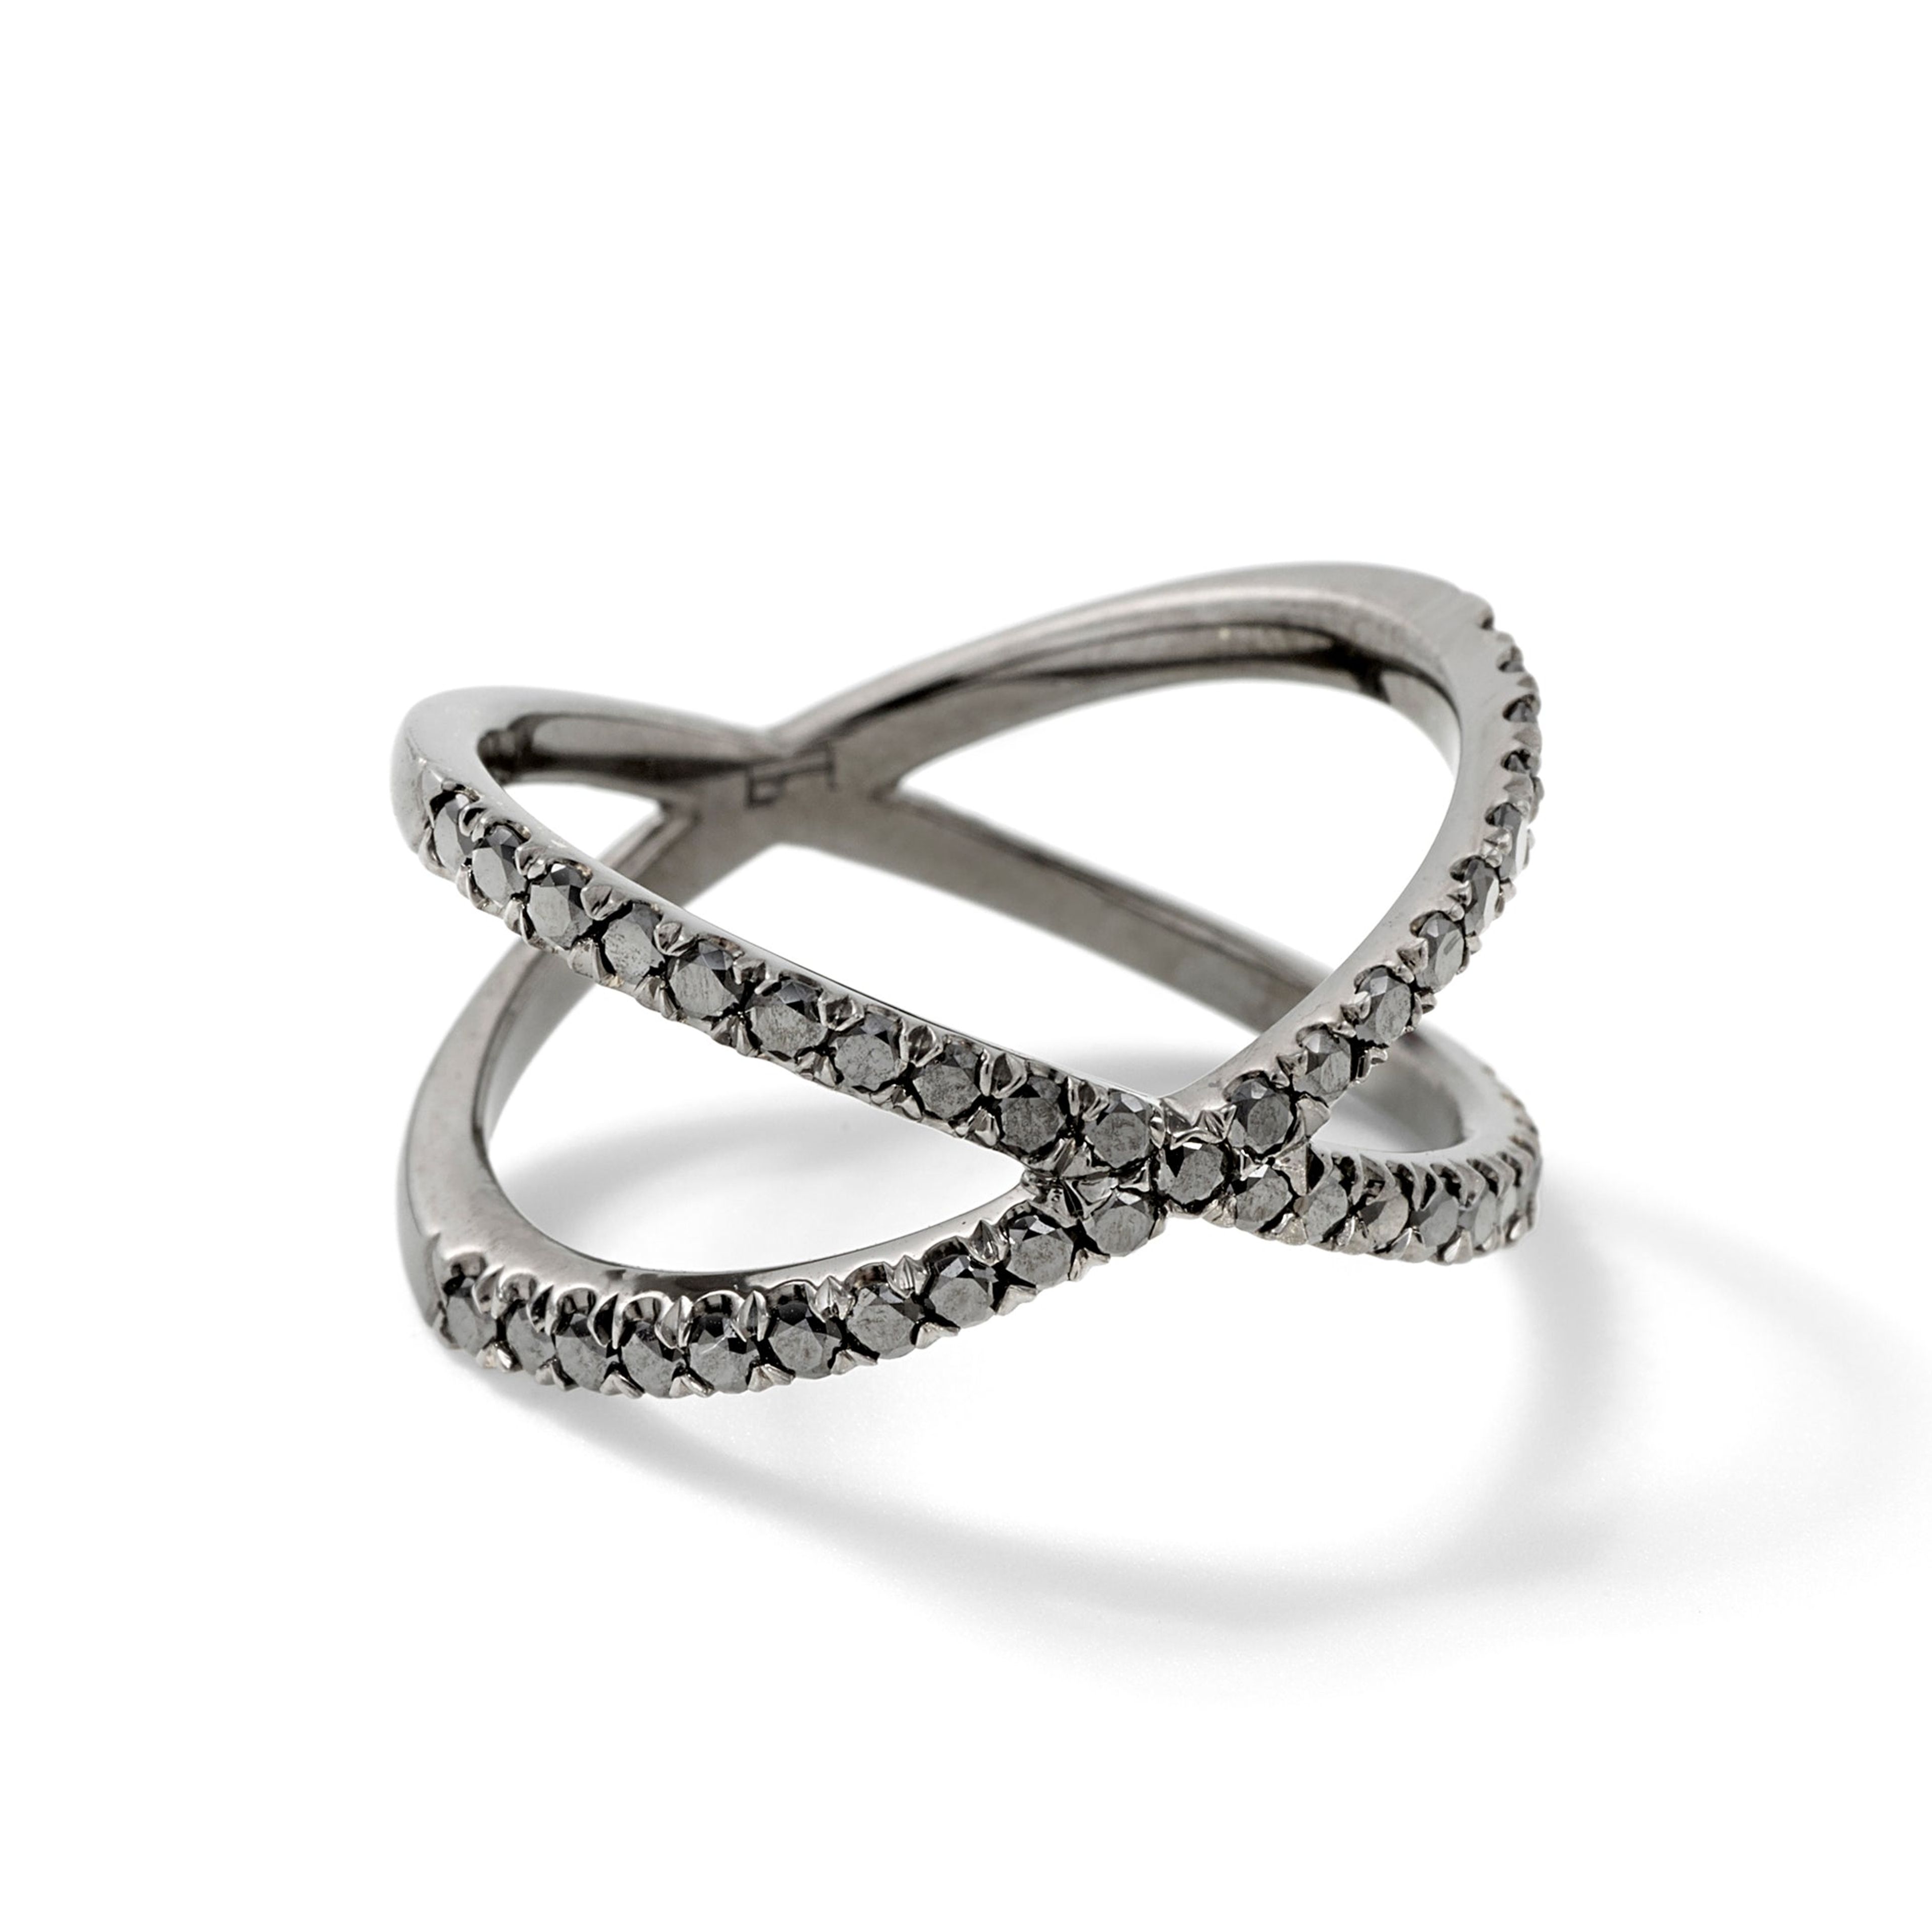 Shorty in 18K Blackened White Gold with Black Diamonds